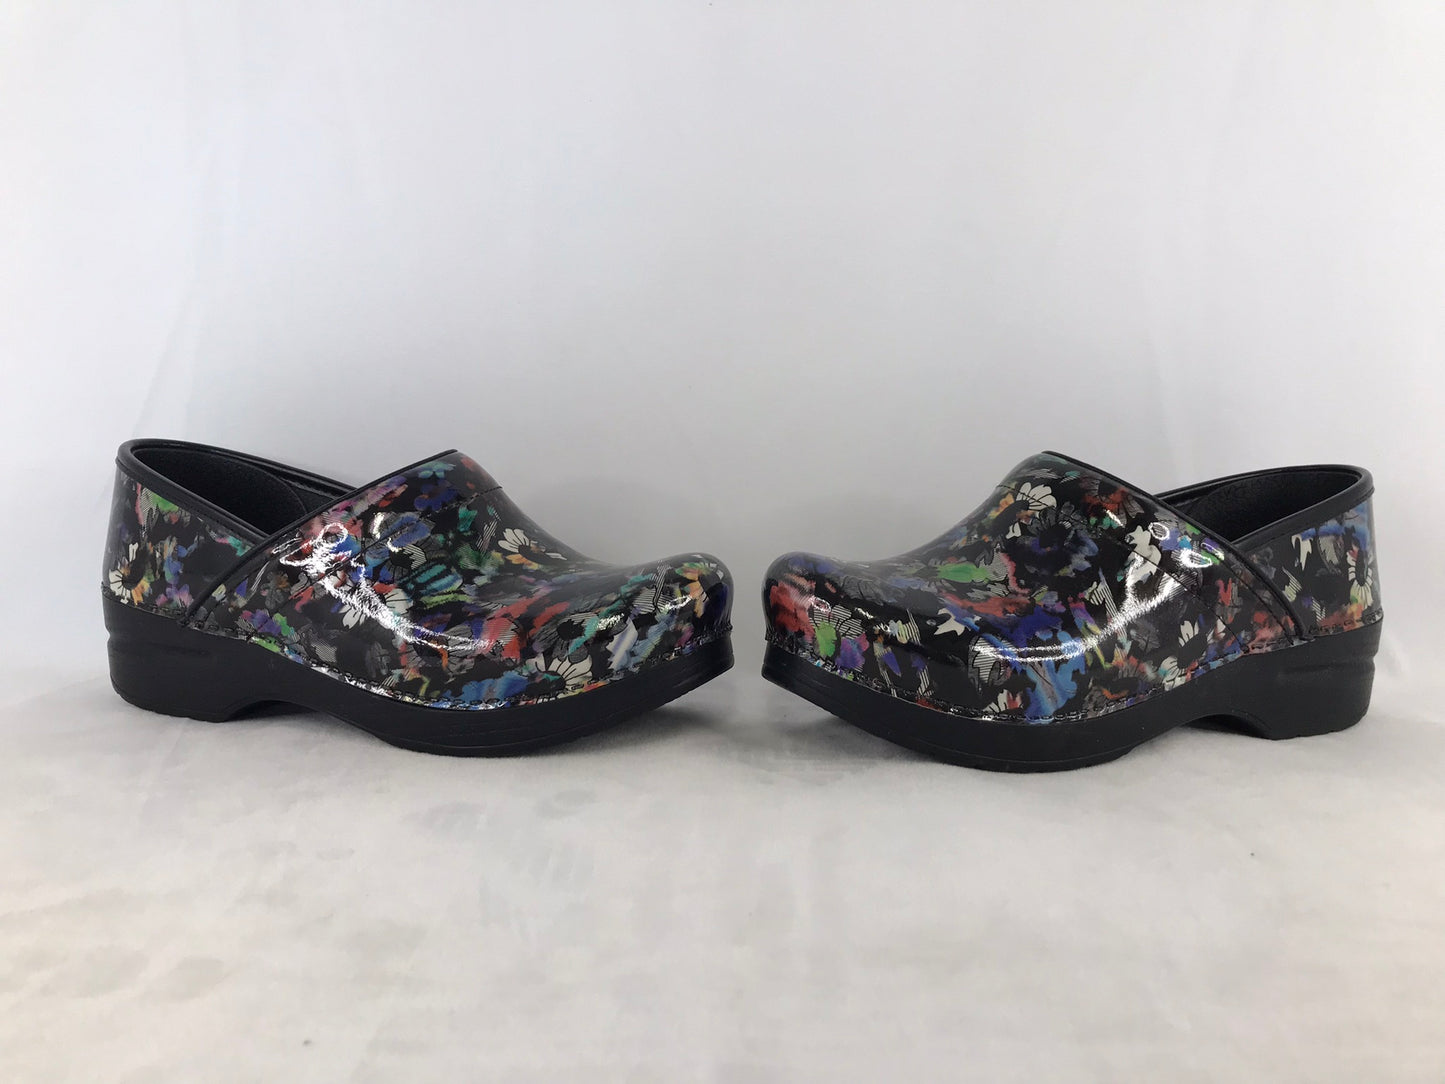 Dansco Ladies Size 8.5 Euro Size 39 Professional Clogs Black Floral NEW NEVER Stepped In